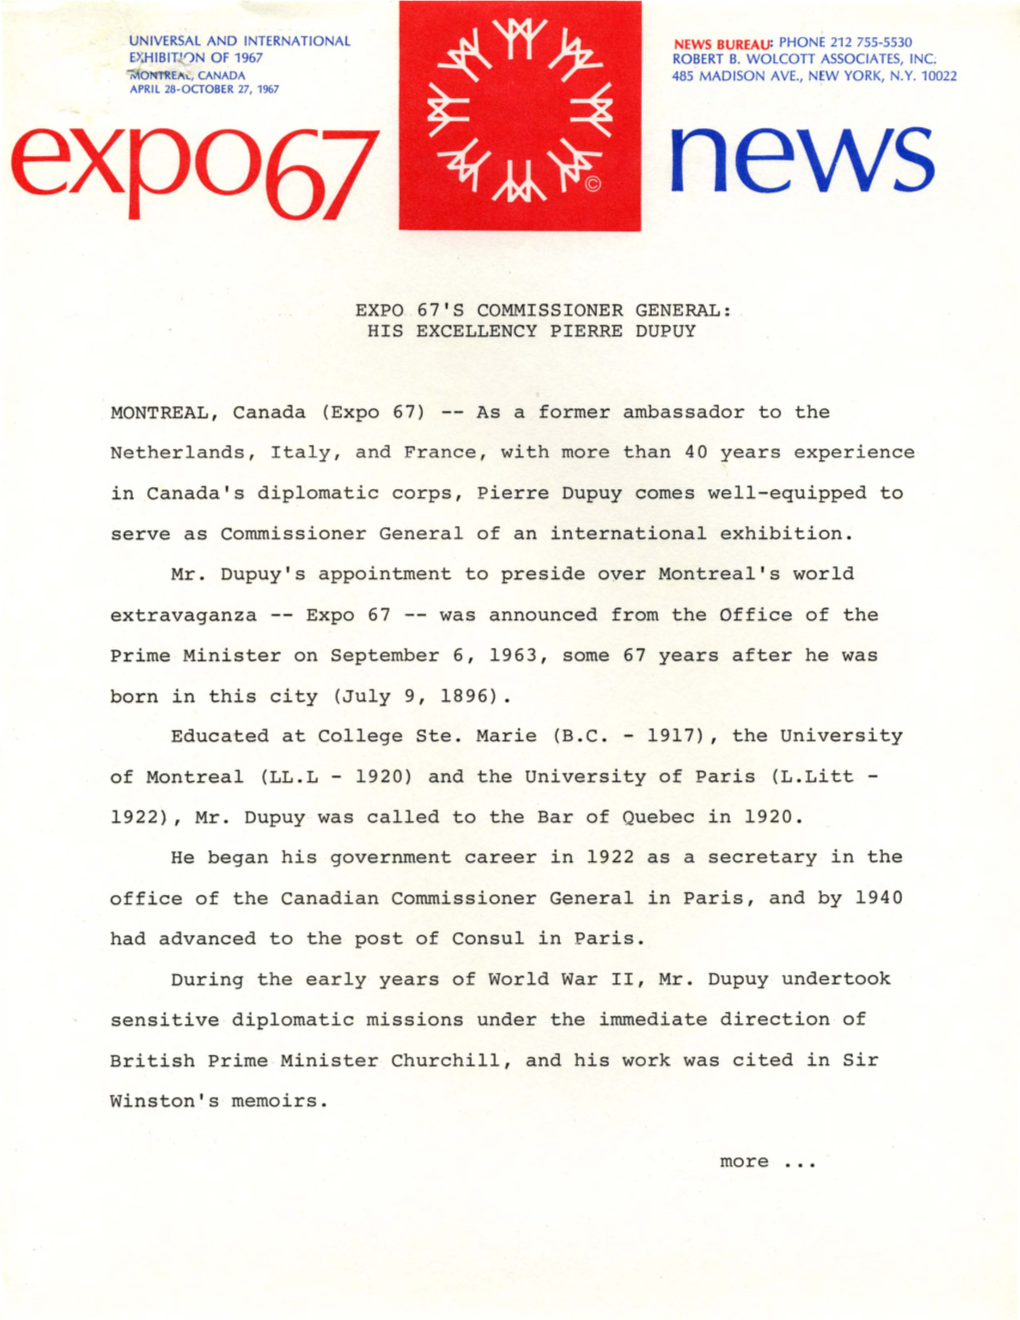 EXPO. 67' S COMMISSIONER GENERAL: HIS EXCELLENCY PIERRE DUPUY MONTREAL, Canada (Expo 67) -- As a Former Ambassador to the Nether